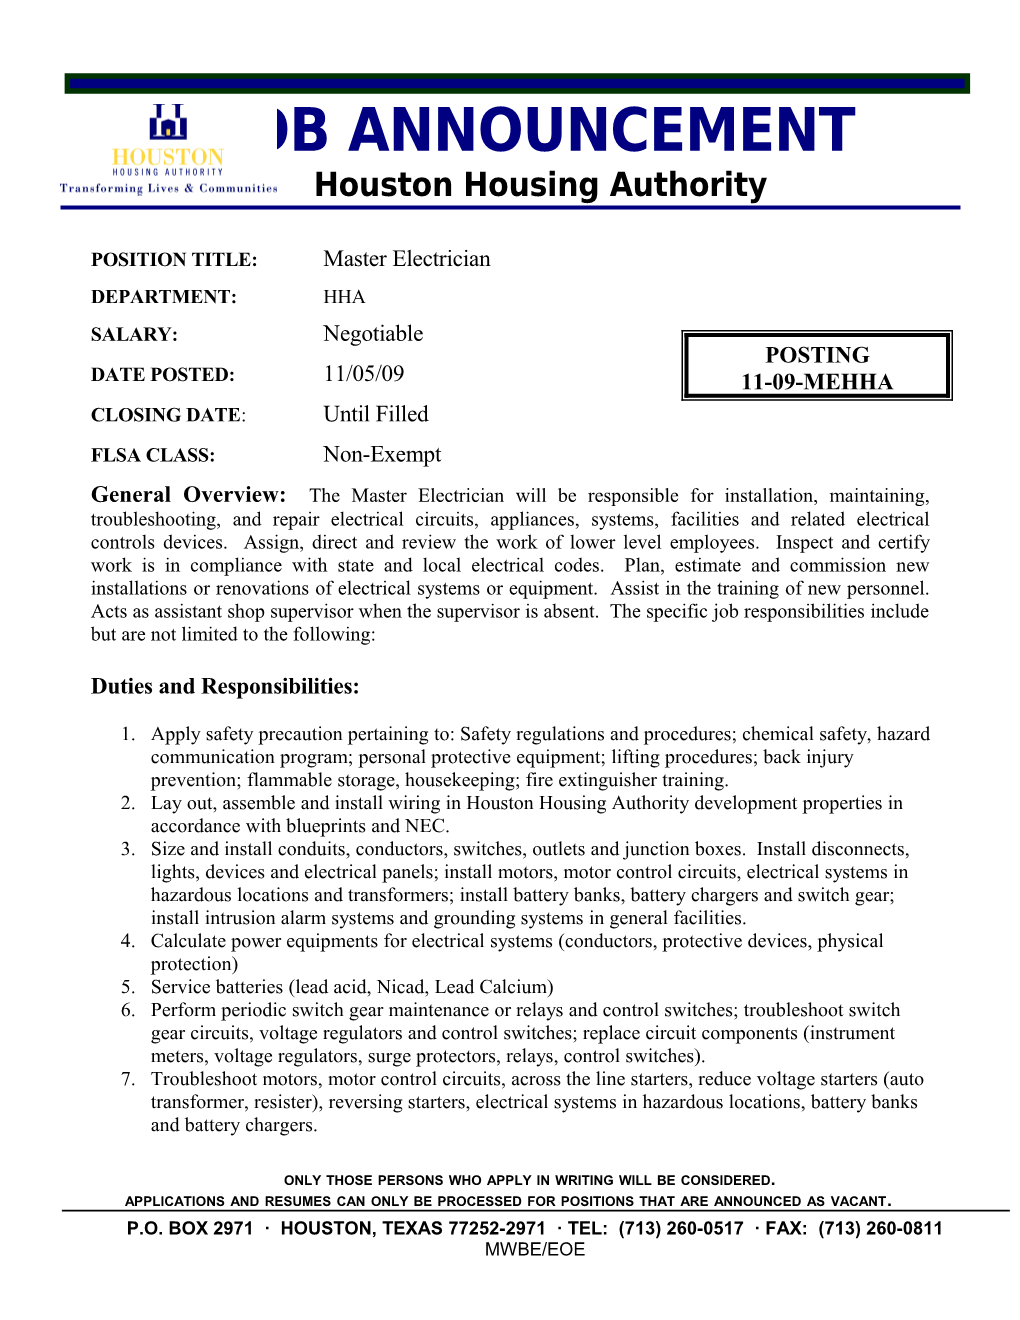 The Housing Authority of the City of Houston Position Description